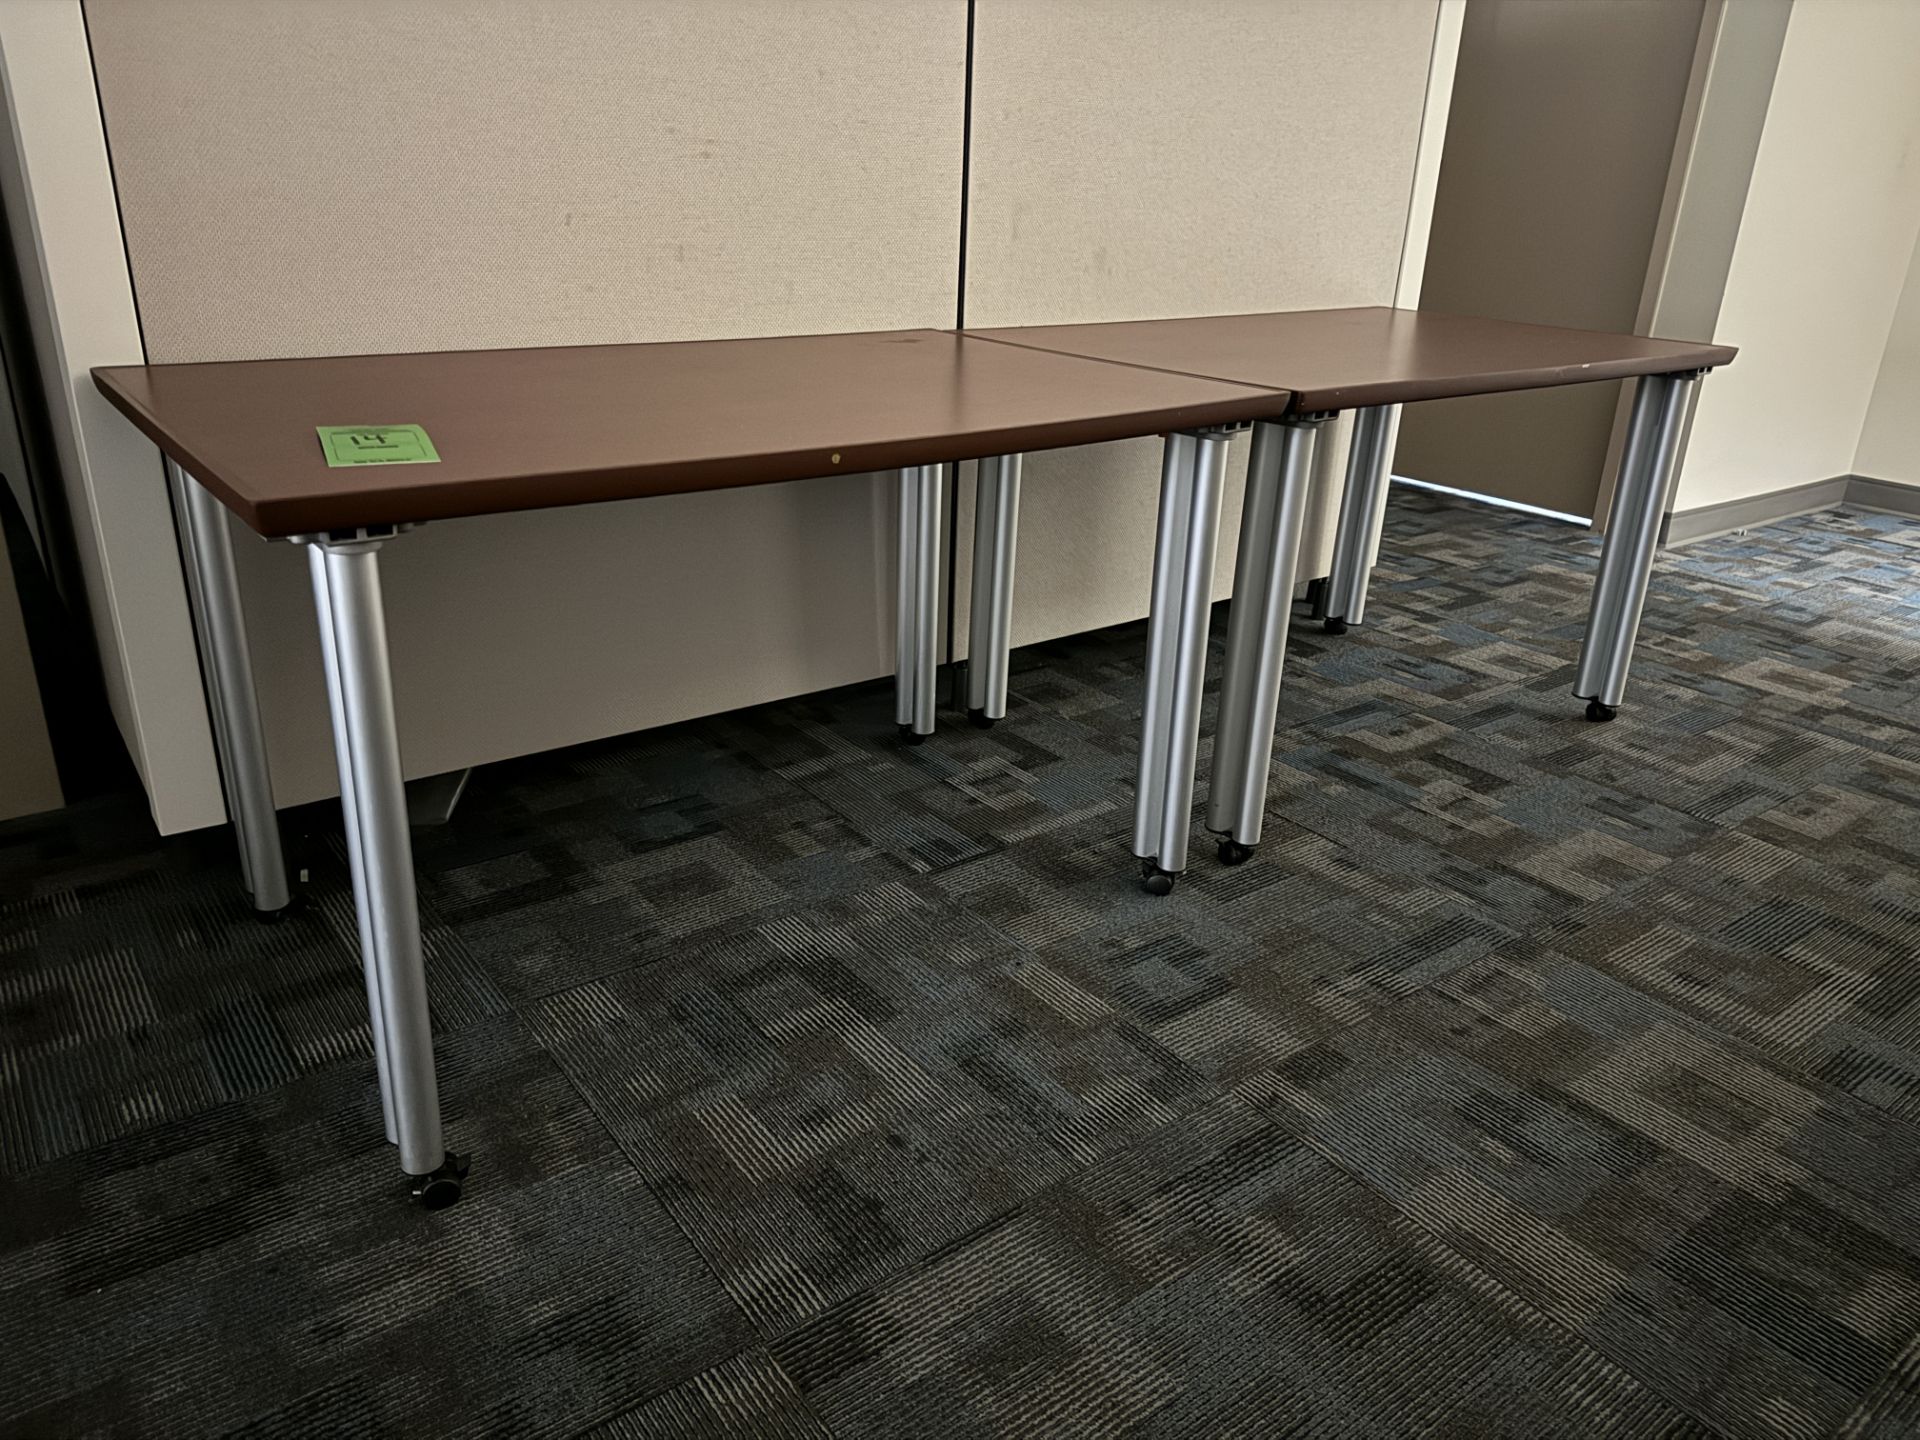 (2) OFFICE TABLES (ZONE 1)